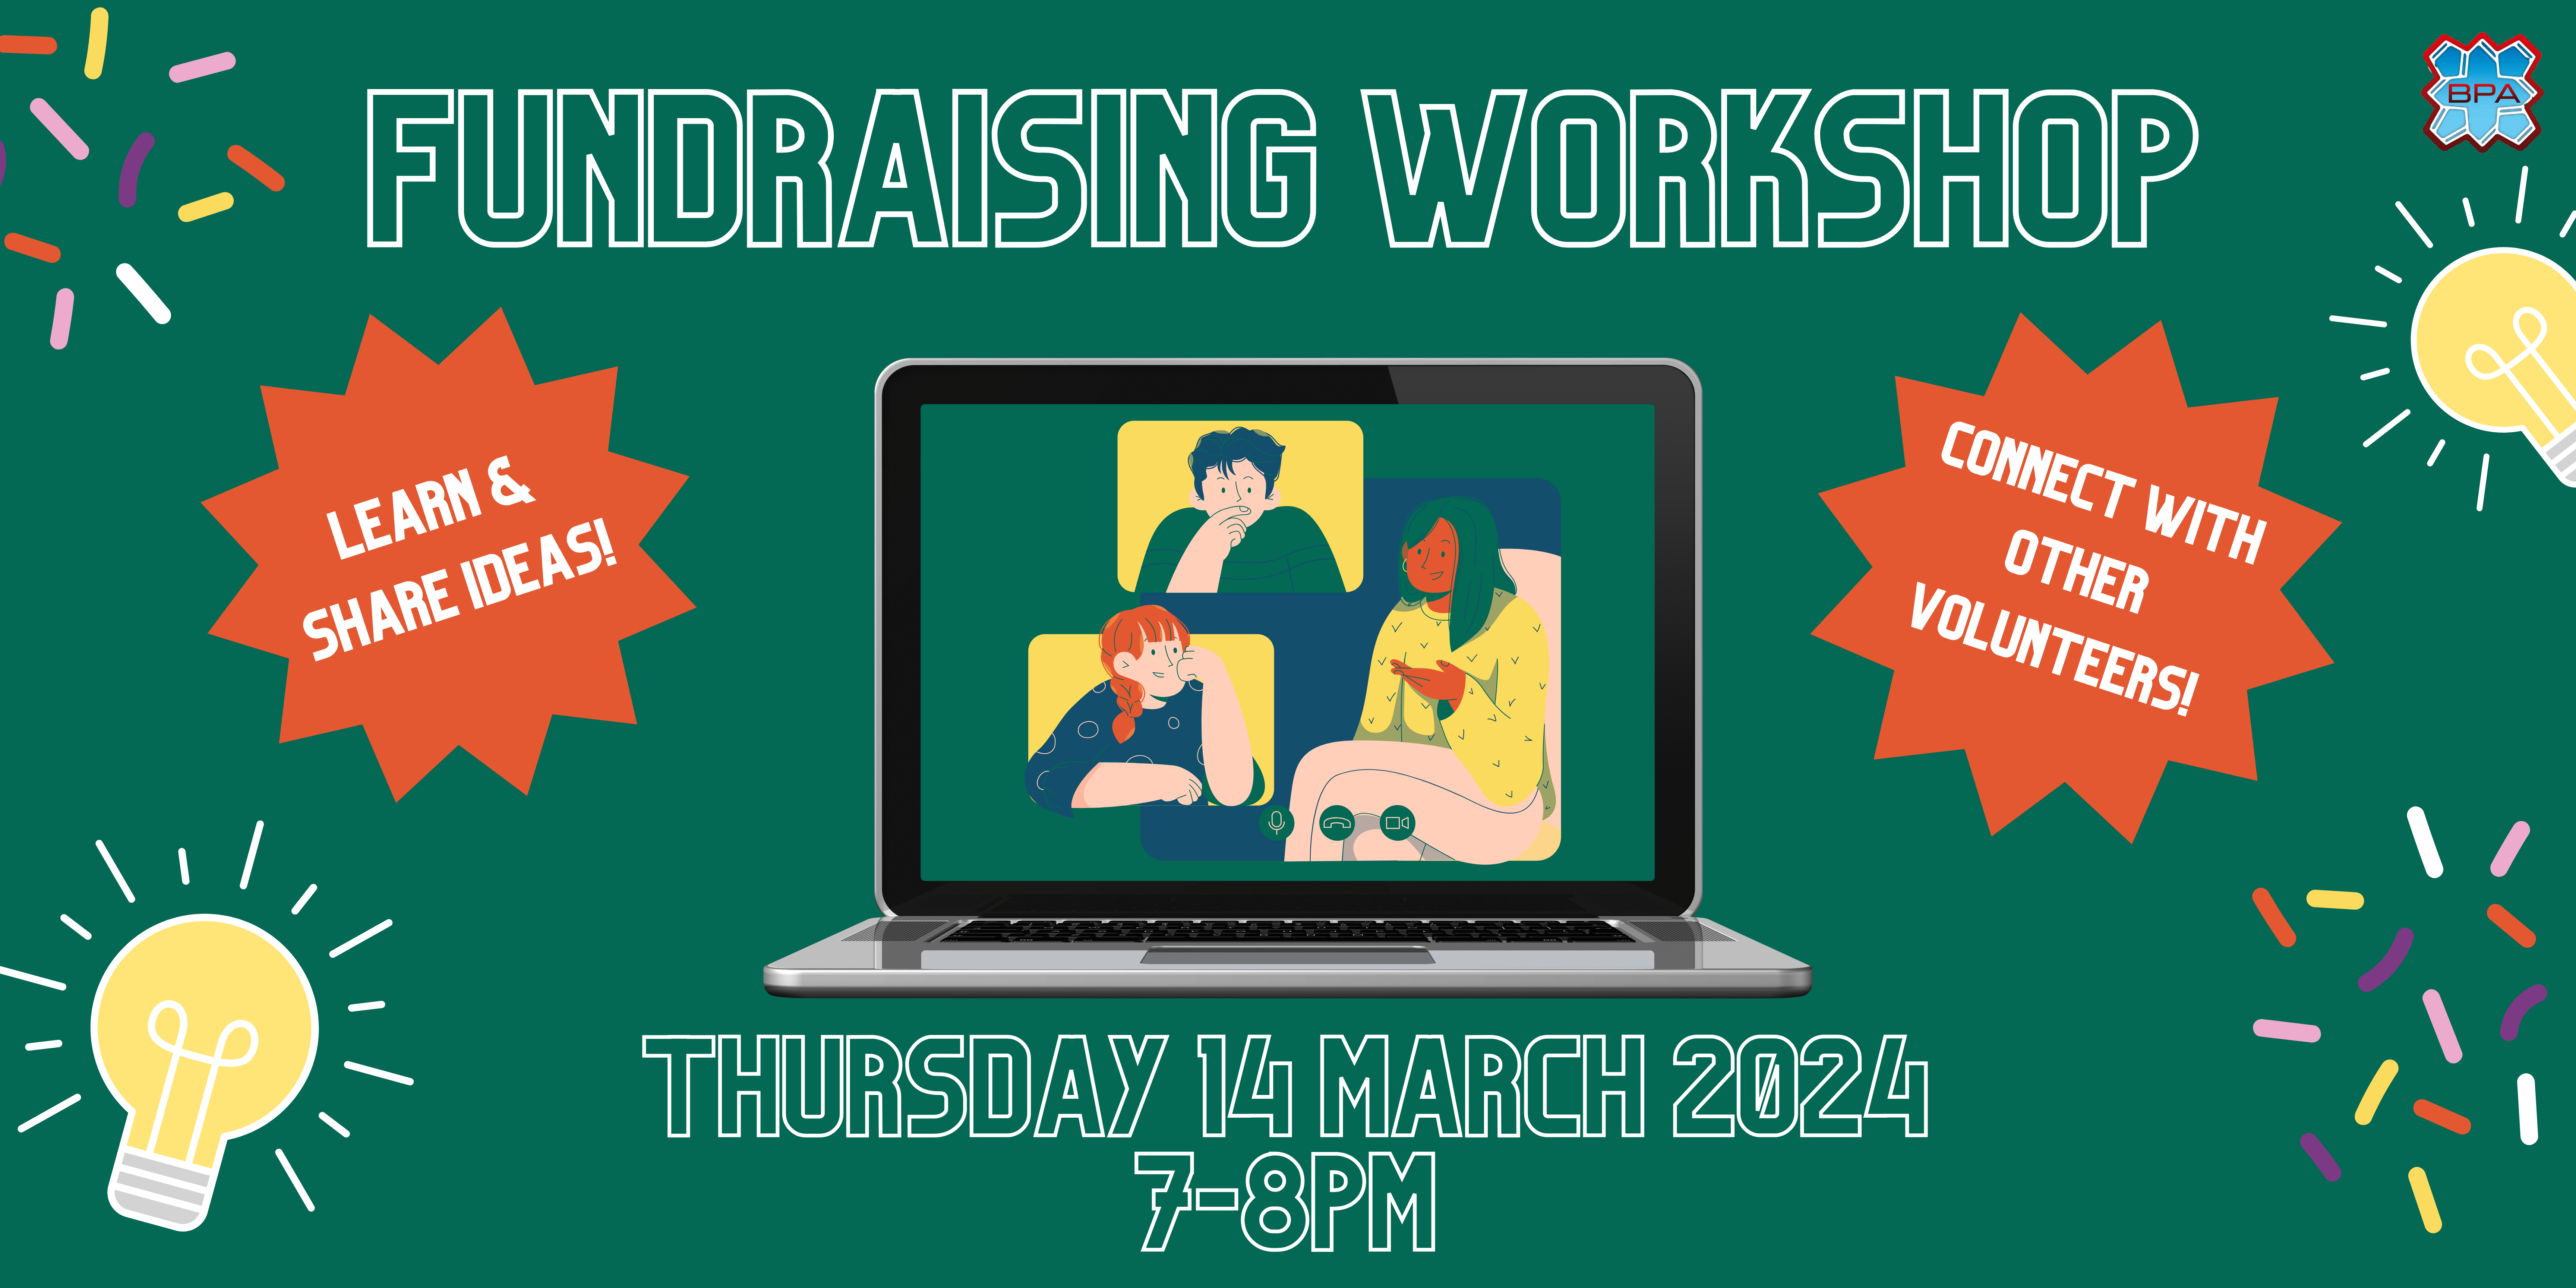 On a green background, text reads "Fundraising workshop. Thursday 14 March 2024, 7-8pm." Underneath, an illustrated image of people in online chat boxes on a laptop screen, with lightbulbs and confetti dotted around the image. Two star-shaped text boxes read: "Learn & share ideas! Connect with other volunteers!" BPA logo in bottom right corner.